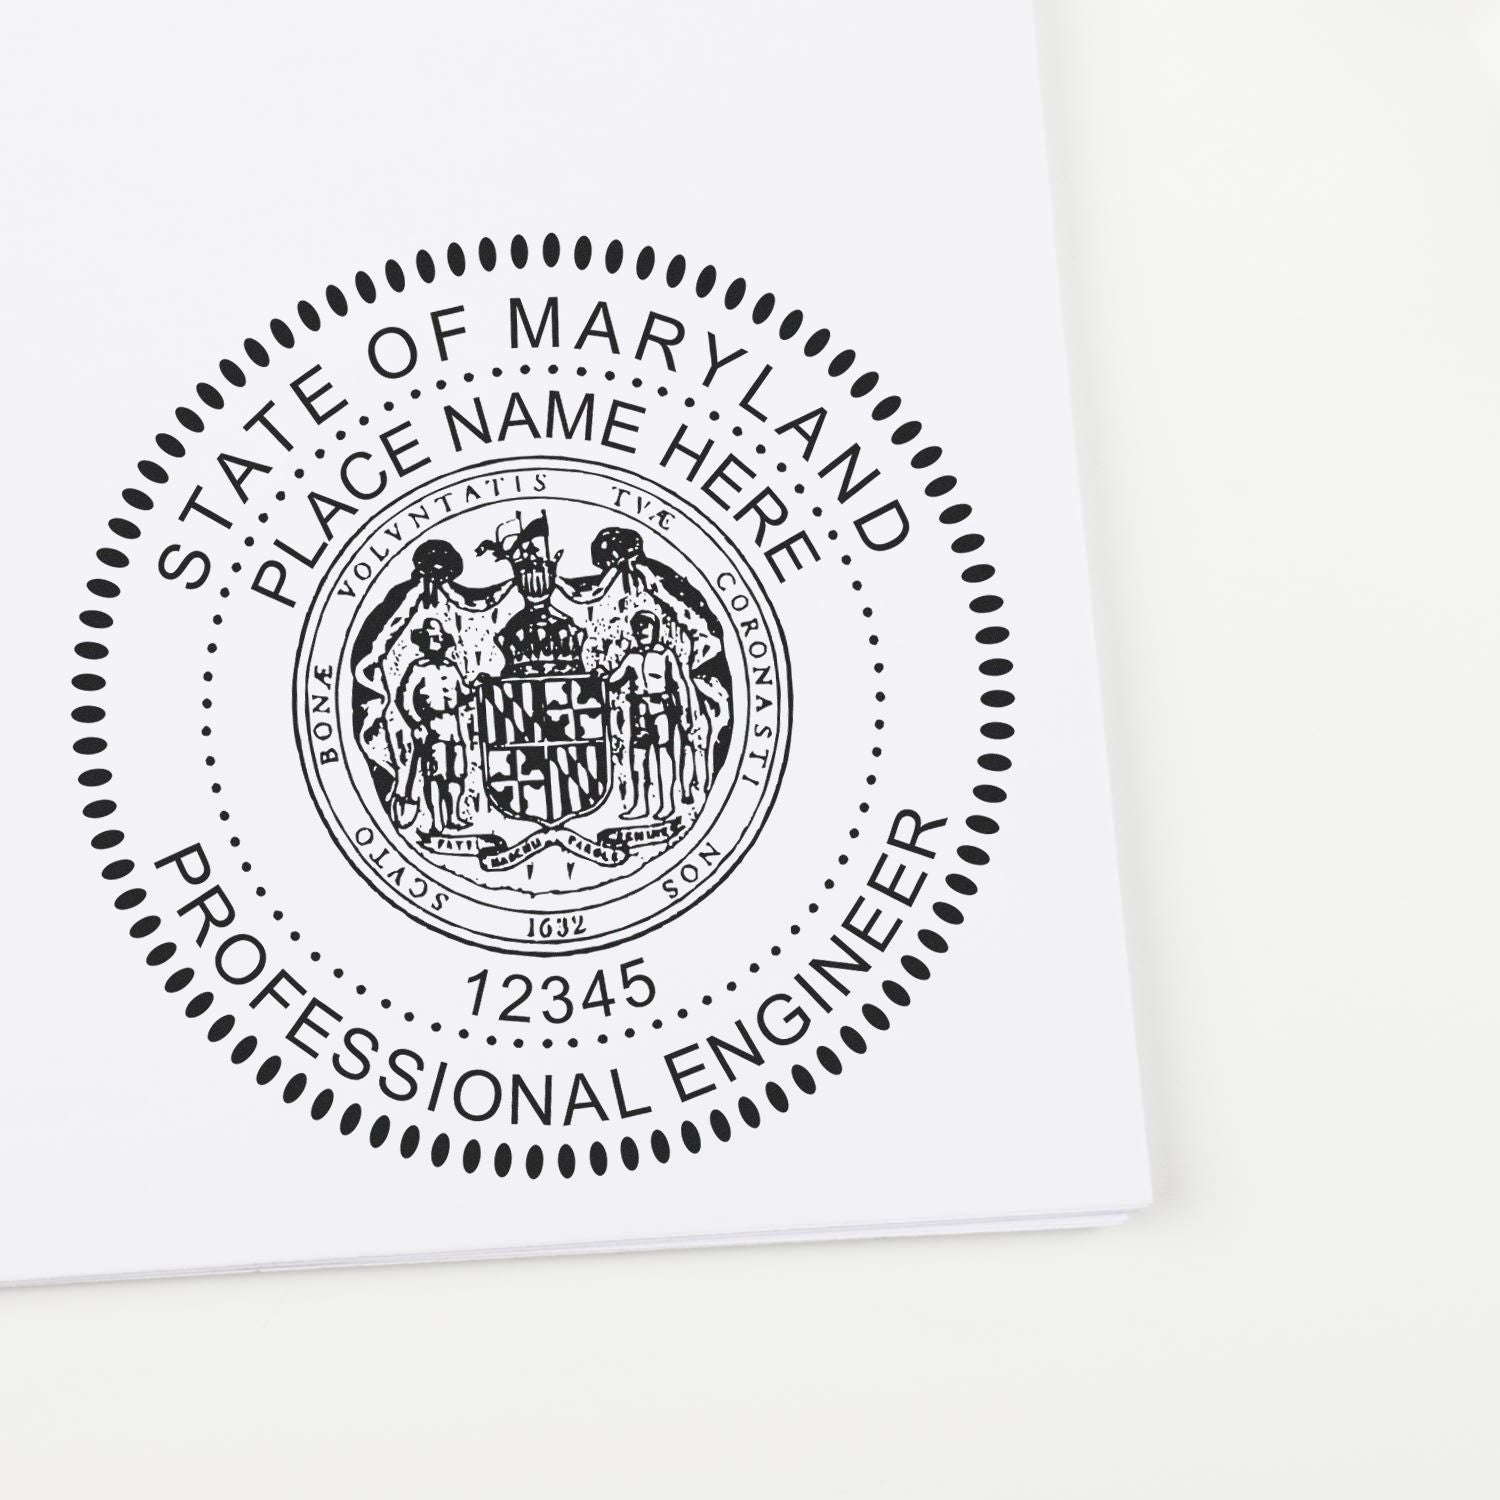 Maryland Professional Engineer Stamp Rules and Regulations Feature Post Image